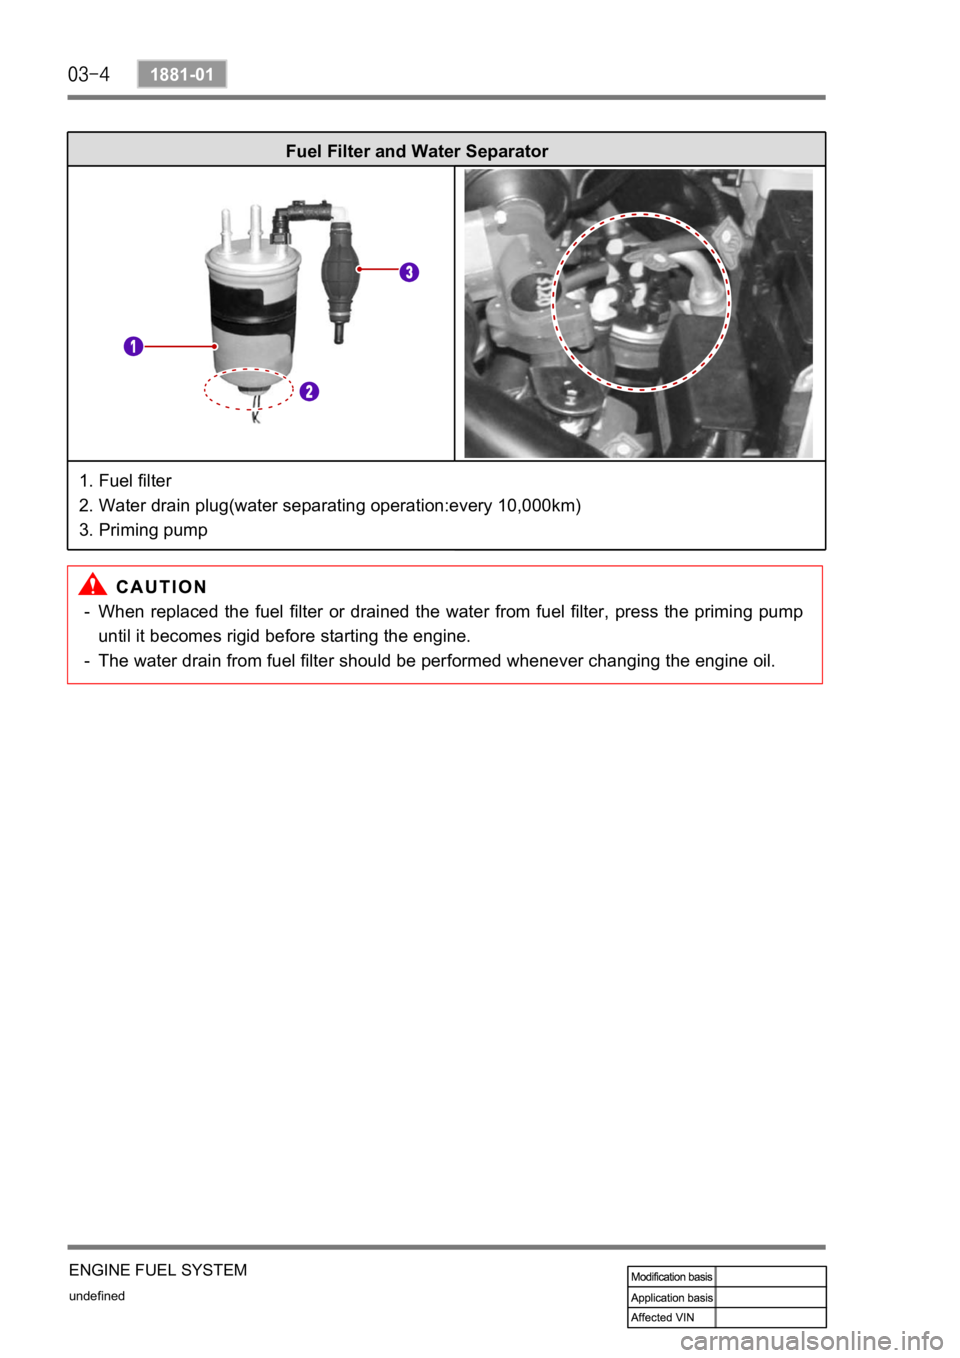 SSANGYONG KYRON 2010  Service Manual undefined
1881-01
ENGINE FUEL SYSTEM
 Fuel Filter and Water Separator
1. Fuel filter 
2. Water drain plug(water separating operation:every 10,000km)
3. Priming pump
When  replaced  the  fuel  filter  